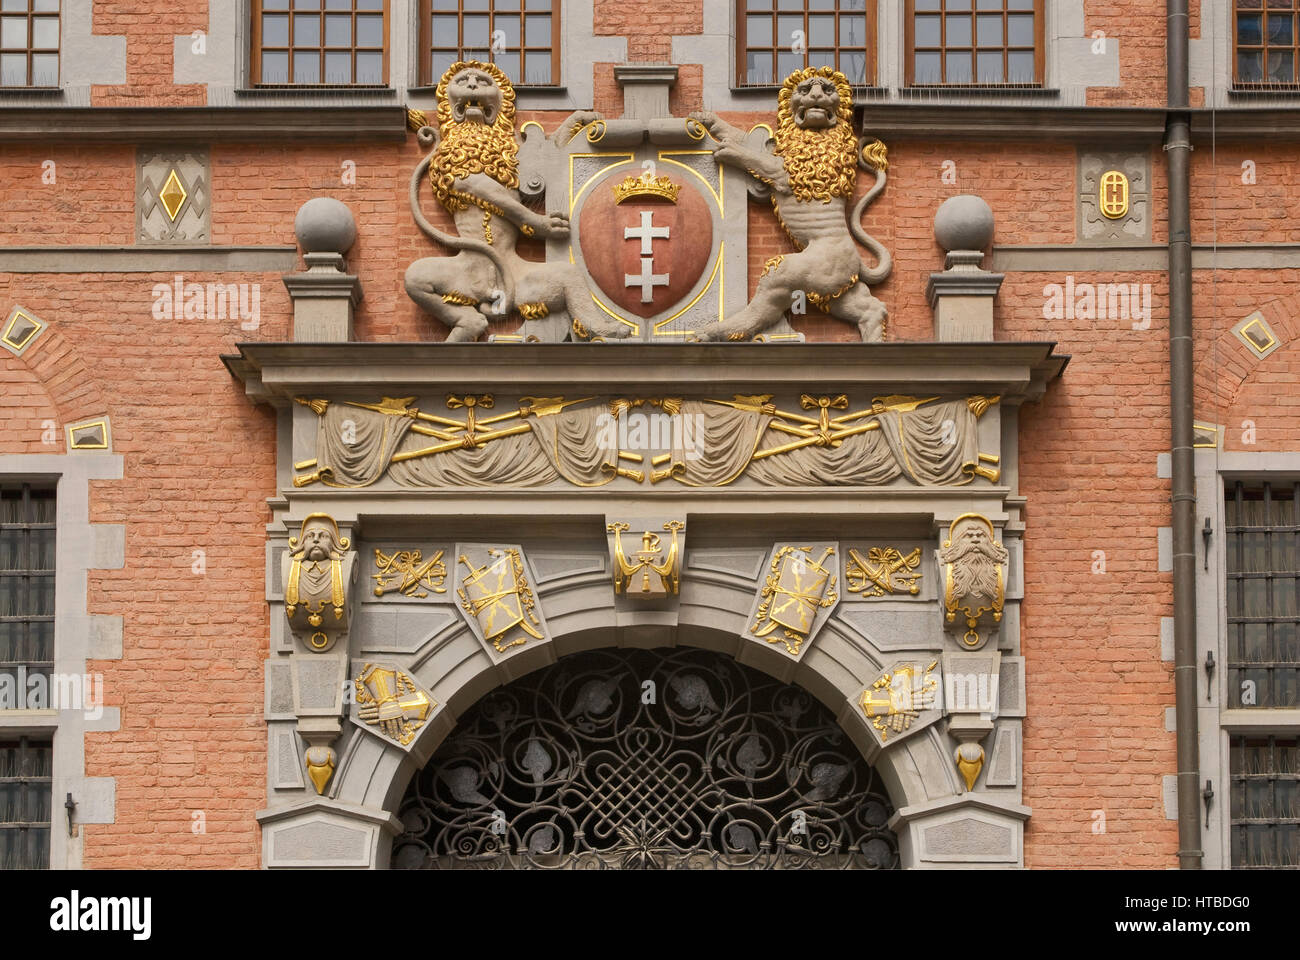 Coat of arms of Gdansk at portal at Great Arsenal in Gdansk, Pomerania, Poland Stock Photo